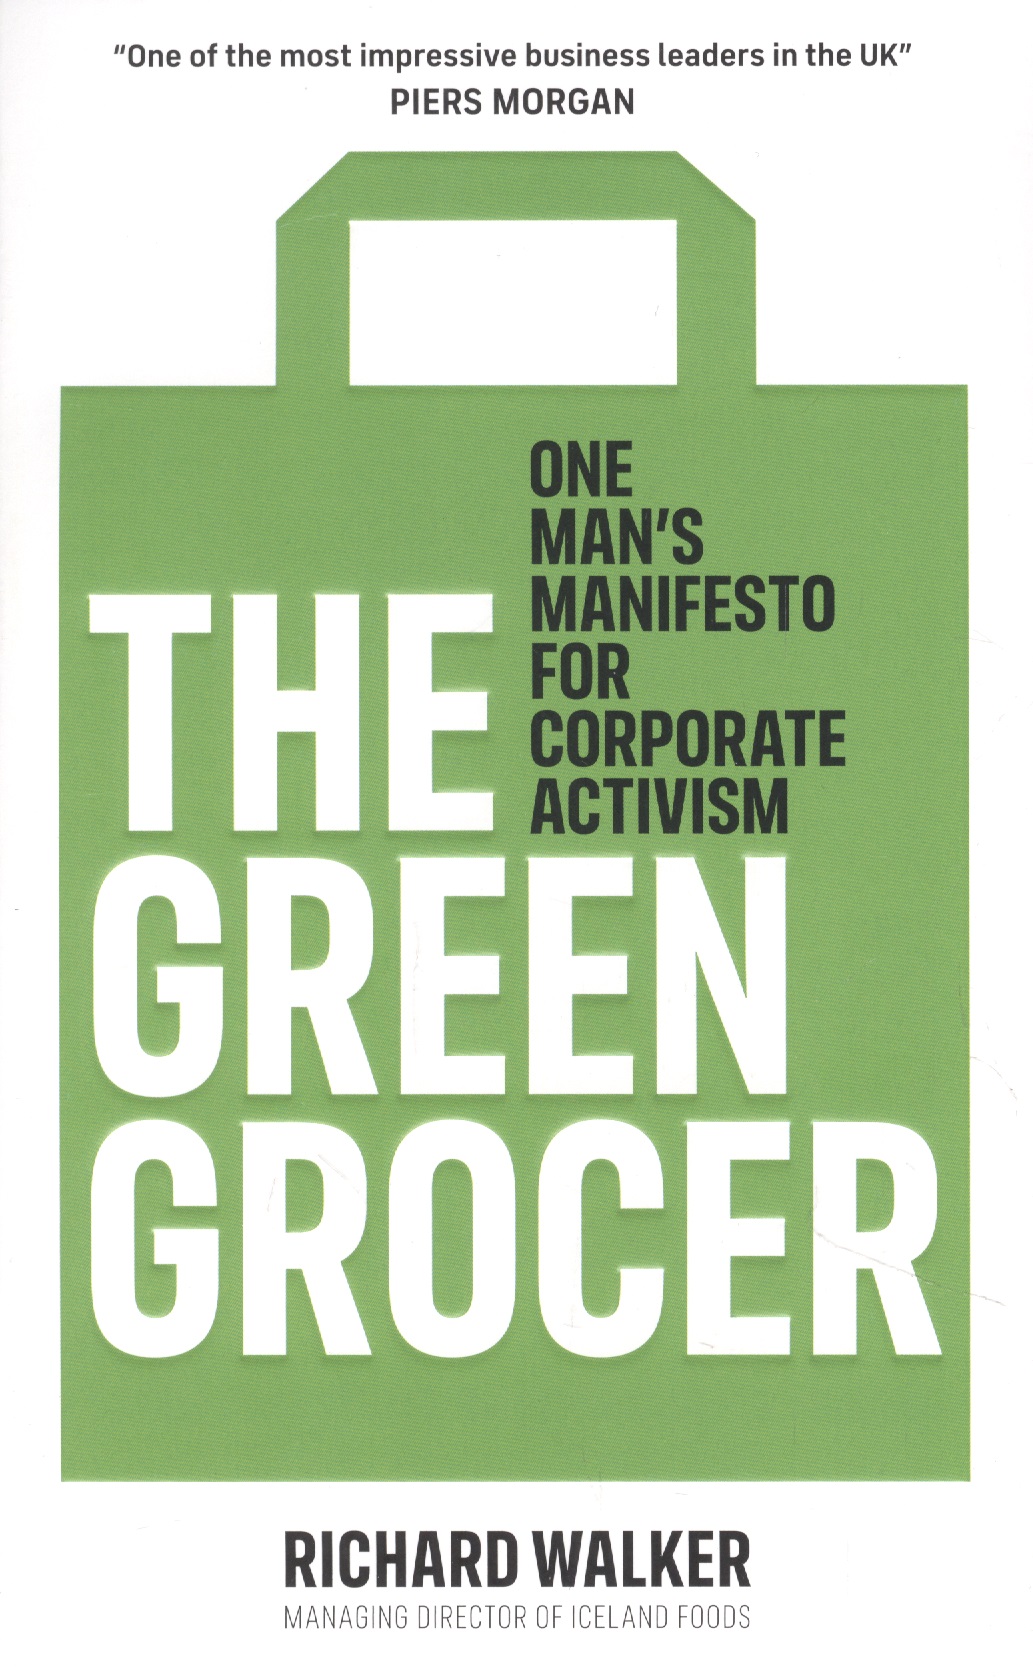 The Green Grocer. One Mans Manifesto for Corporate Activism bridge rachel how to start a business without any money